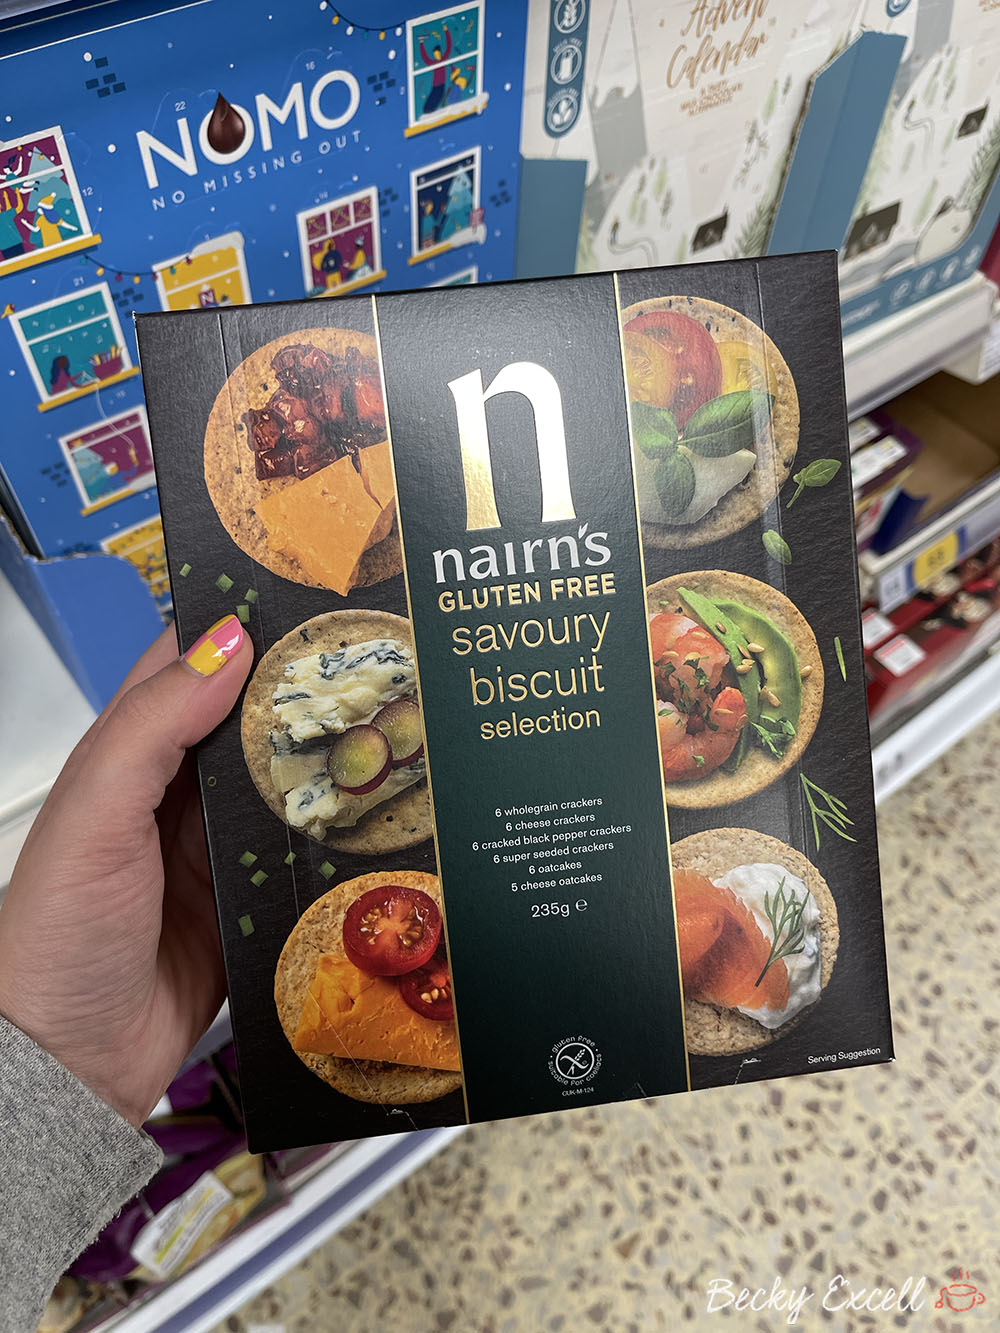 Nairn's savoury biscuit selection gluten-free